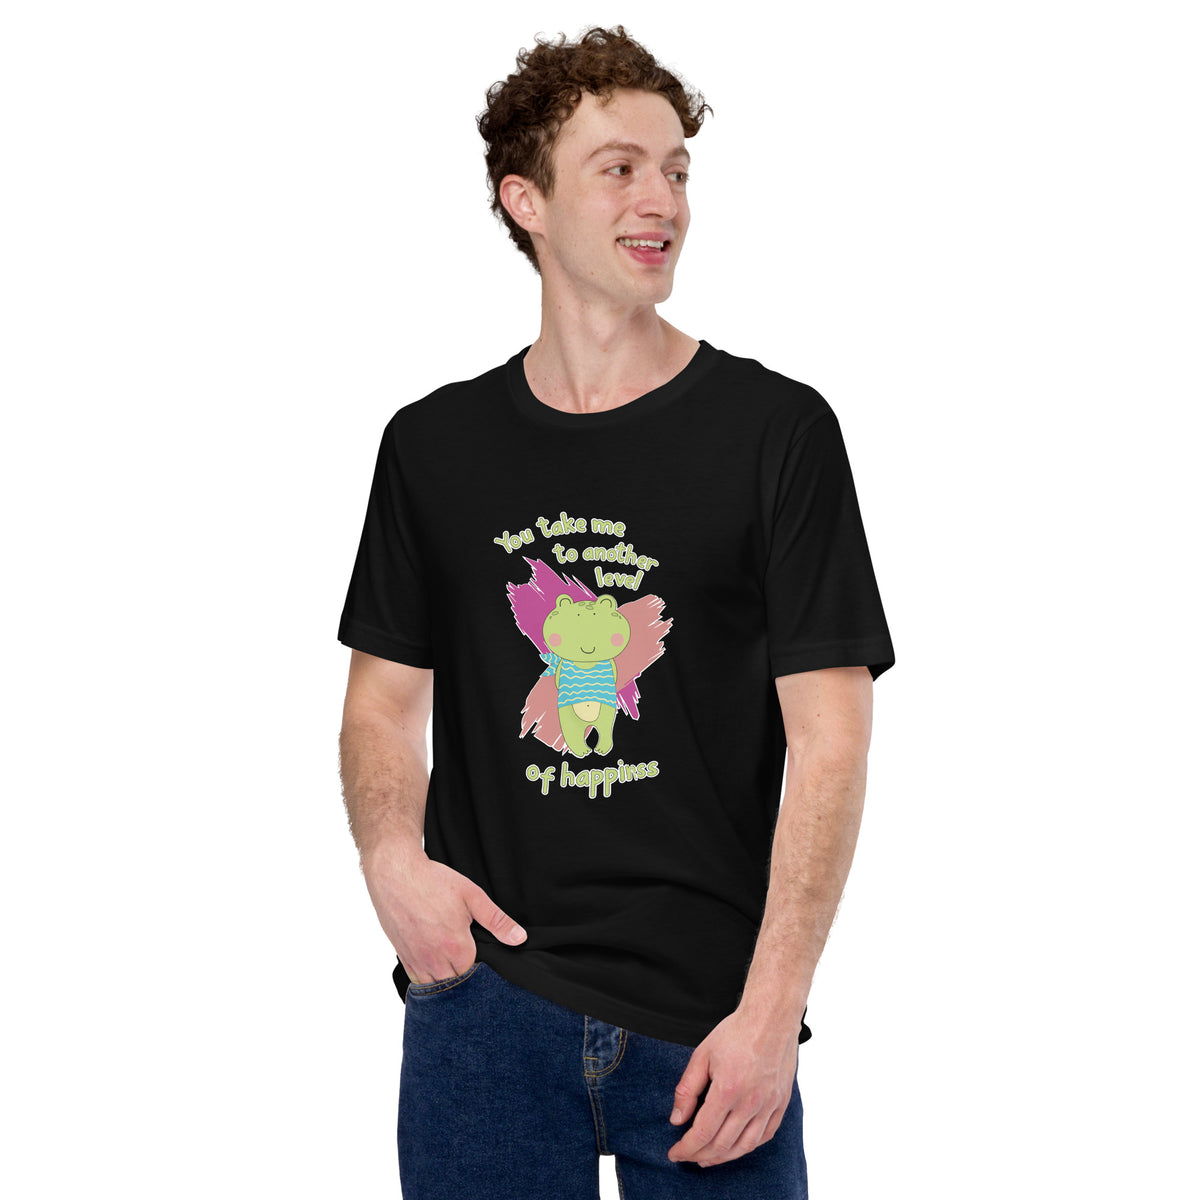 You Take Me To Another Level Of Happiness Unisex Staple t-shirt